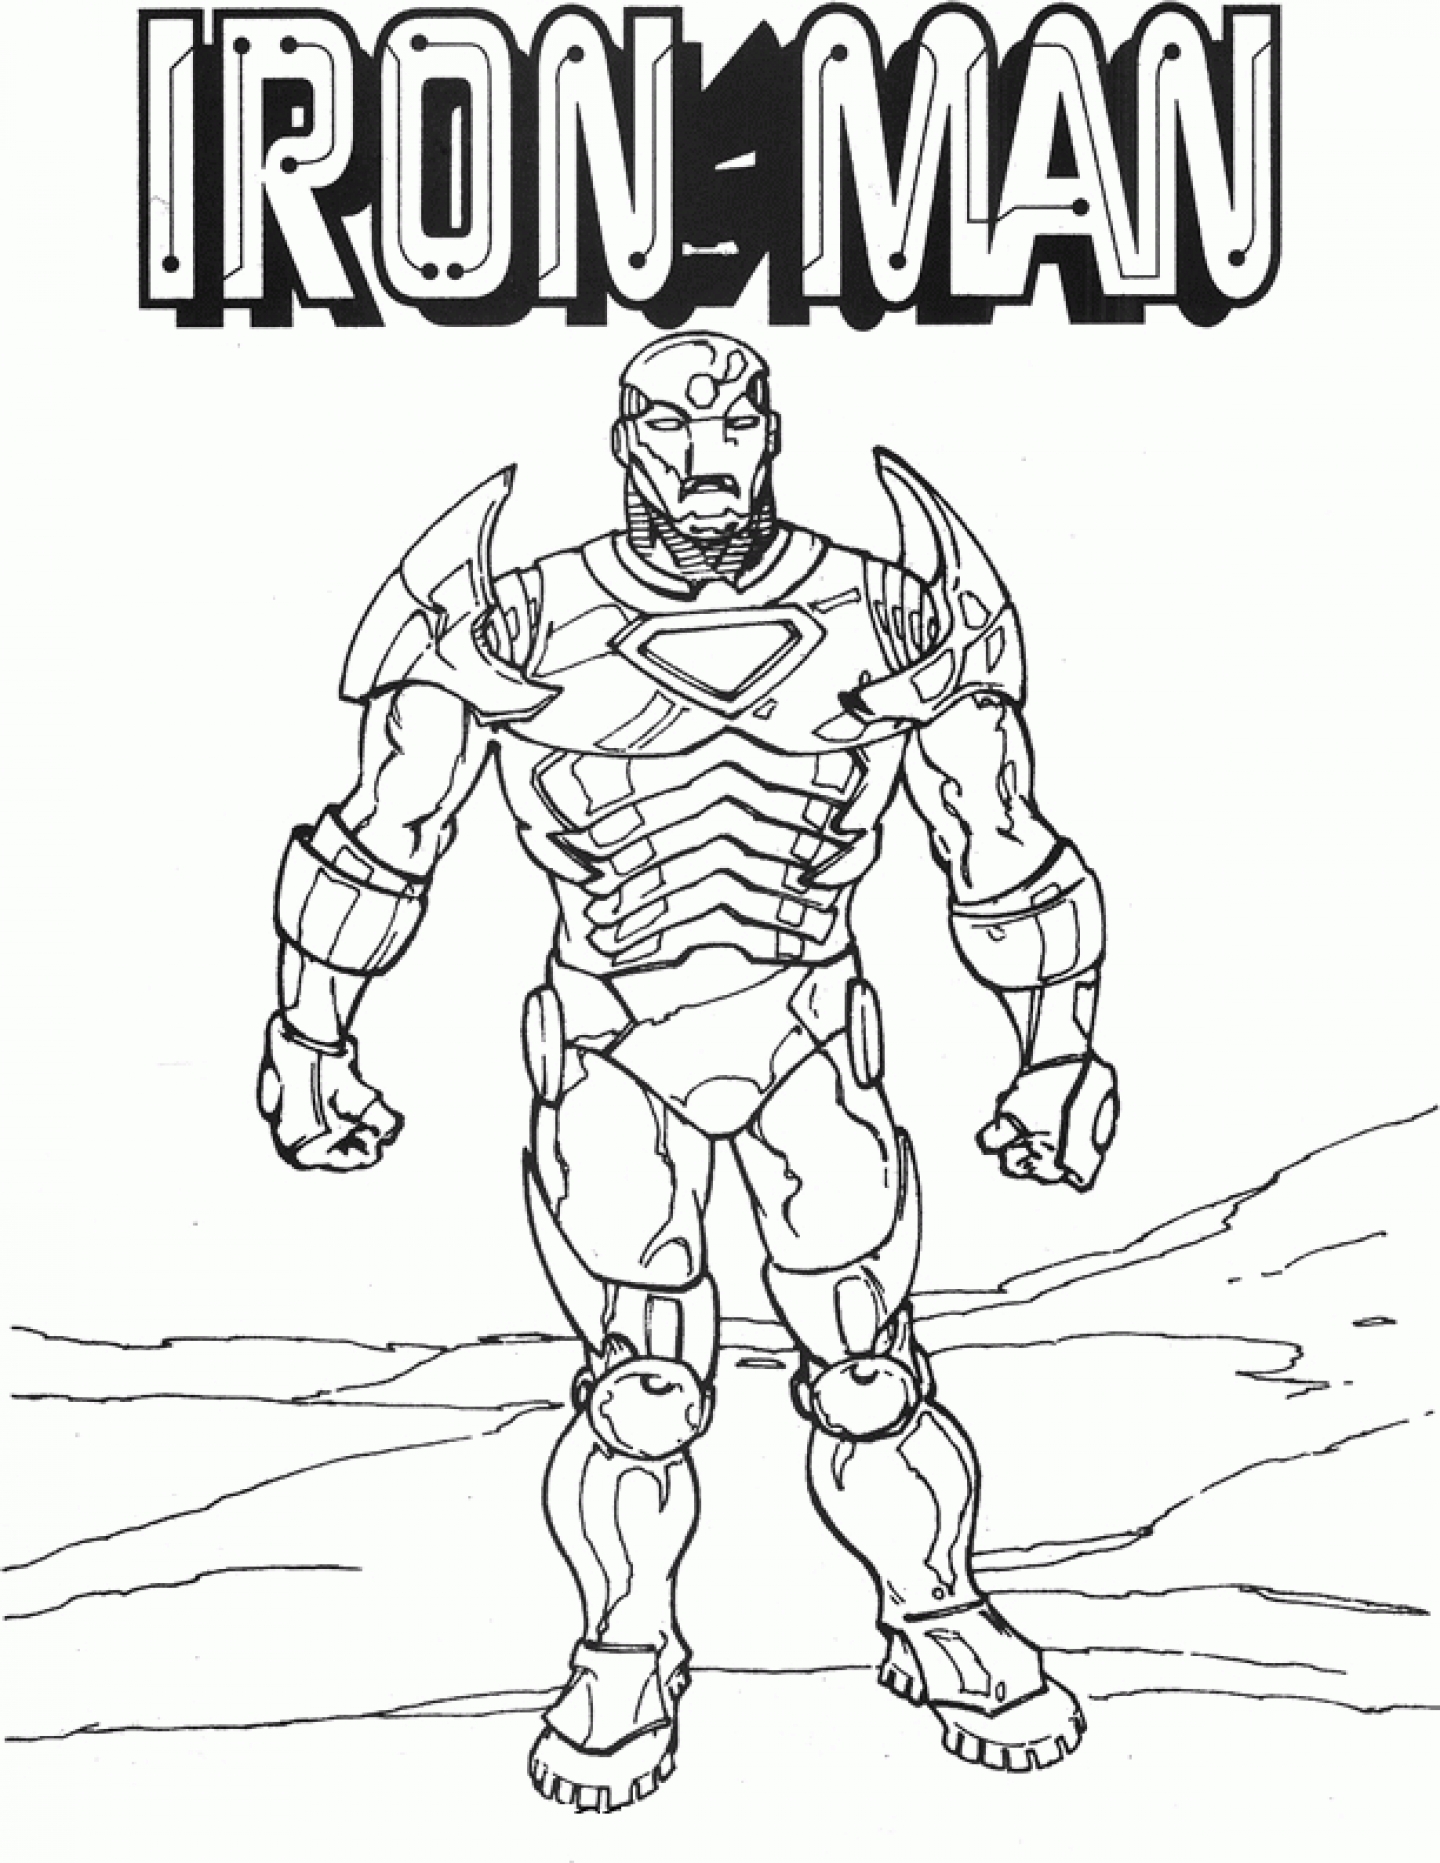  Iron Man Coloring pages | Coloring page for kids | #20